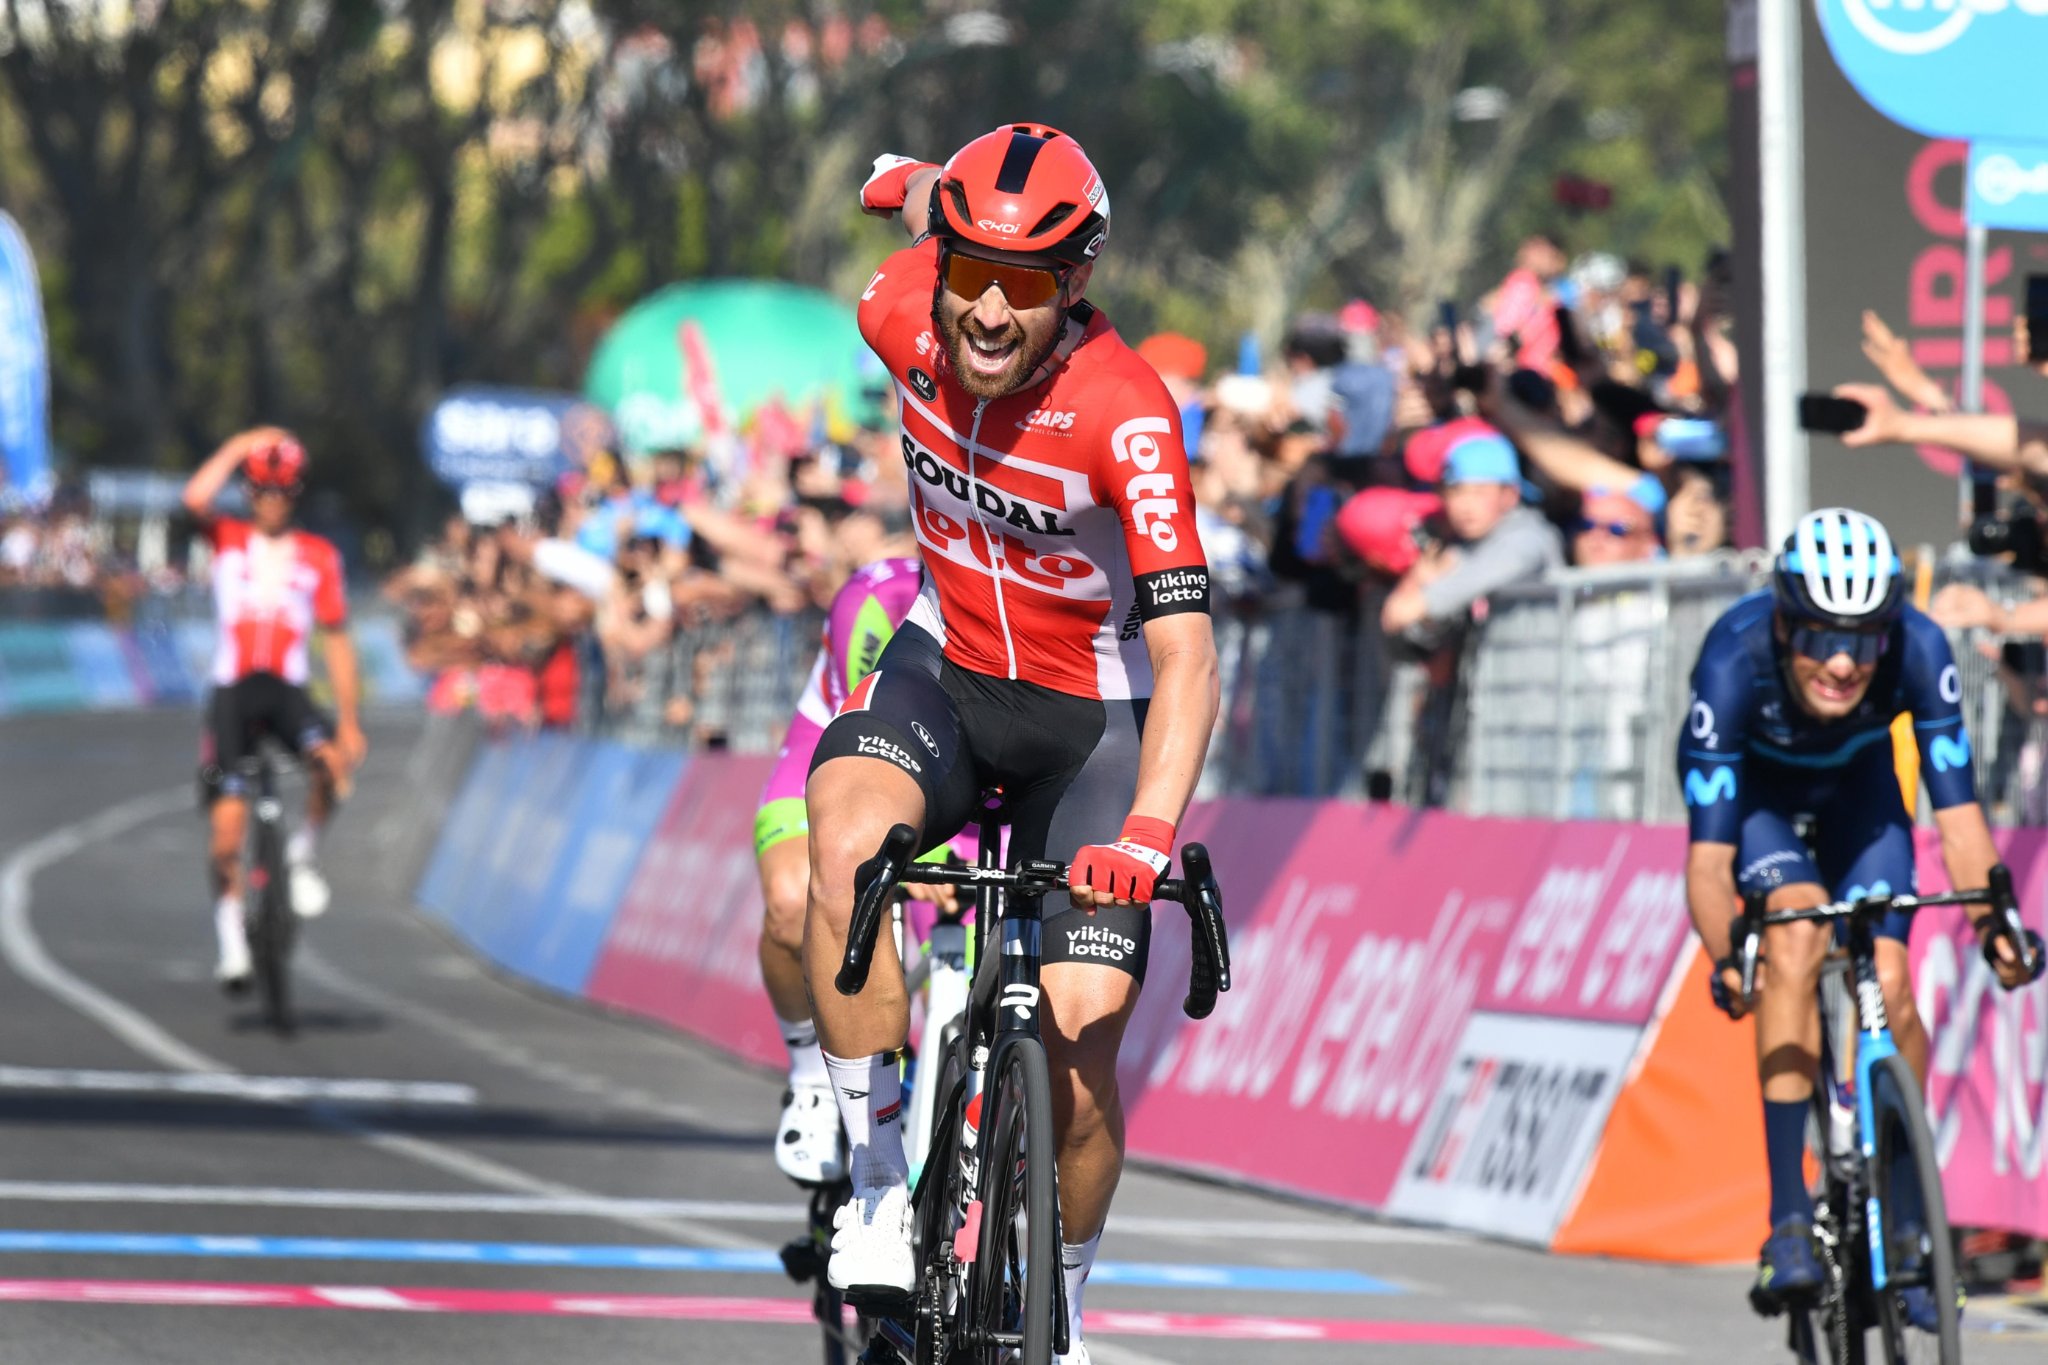 A stage on the GIRO for Thomas De Gendt